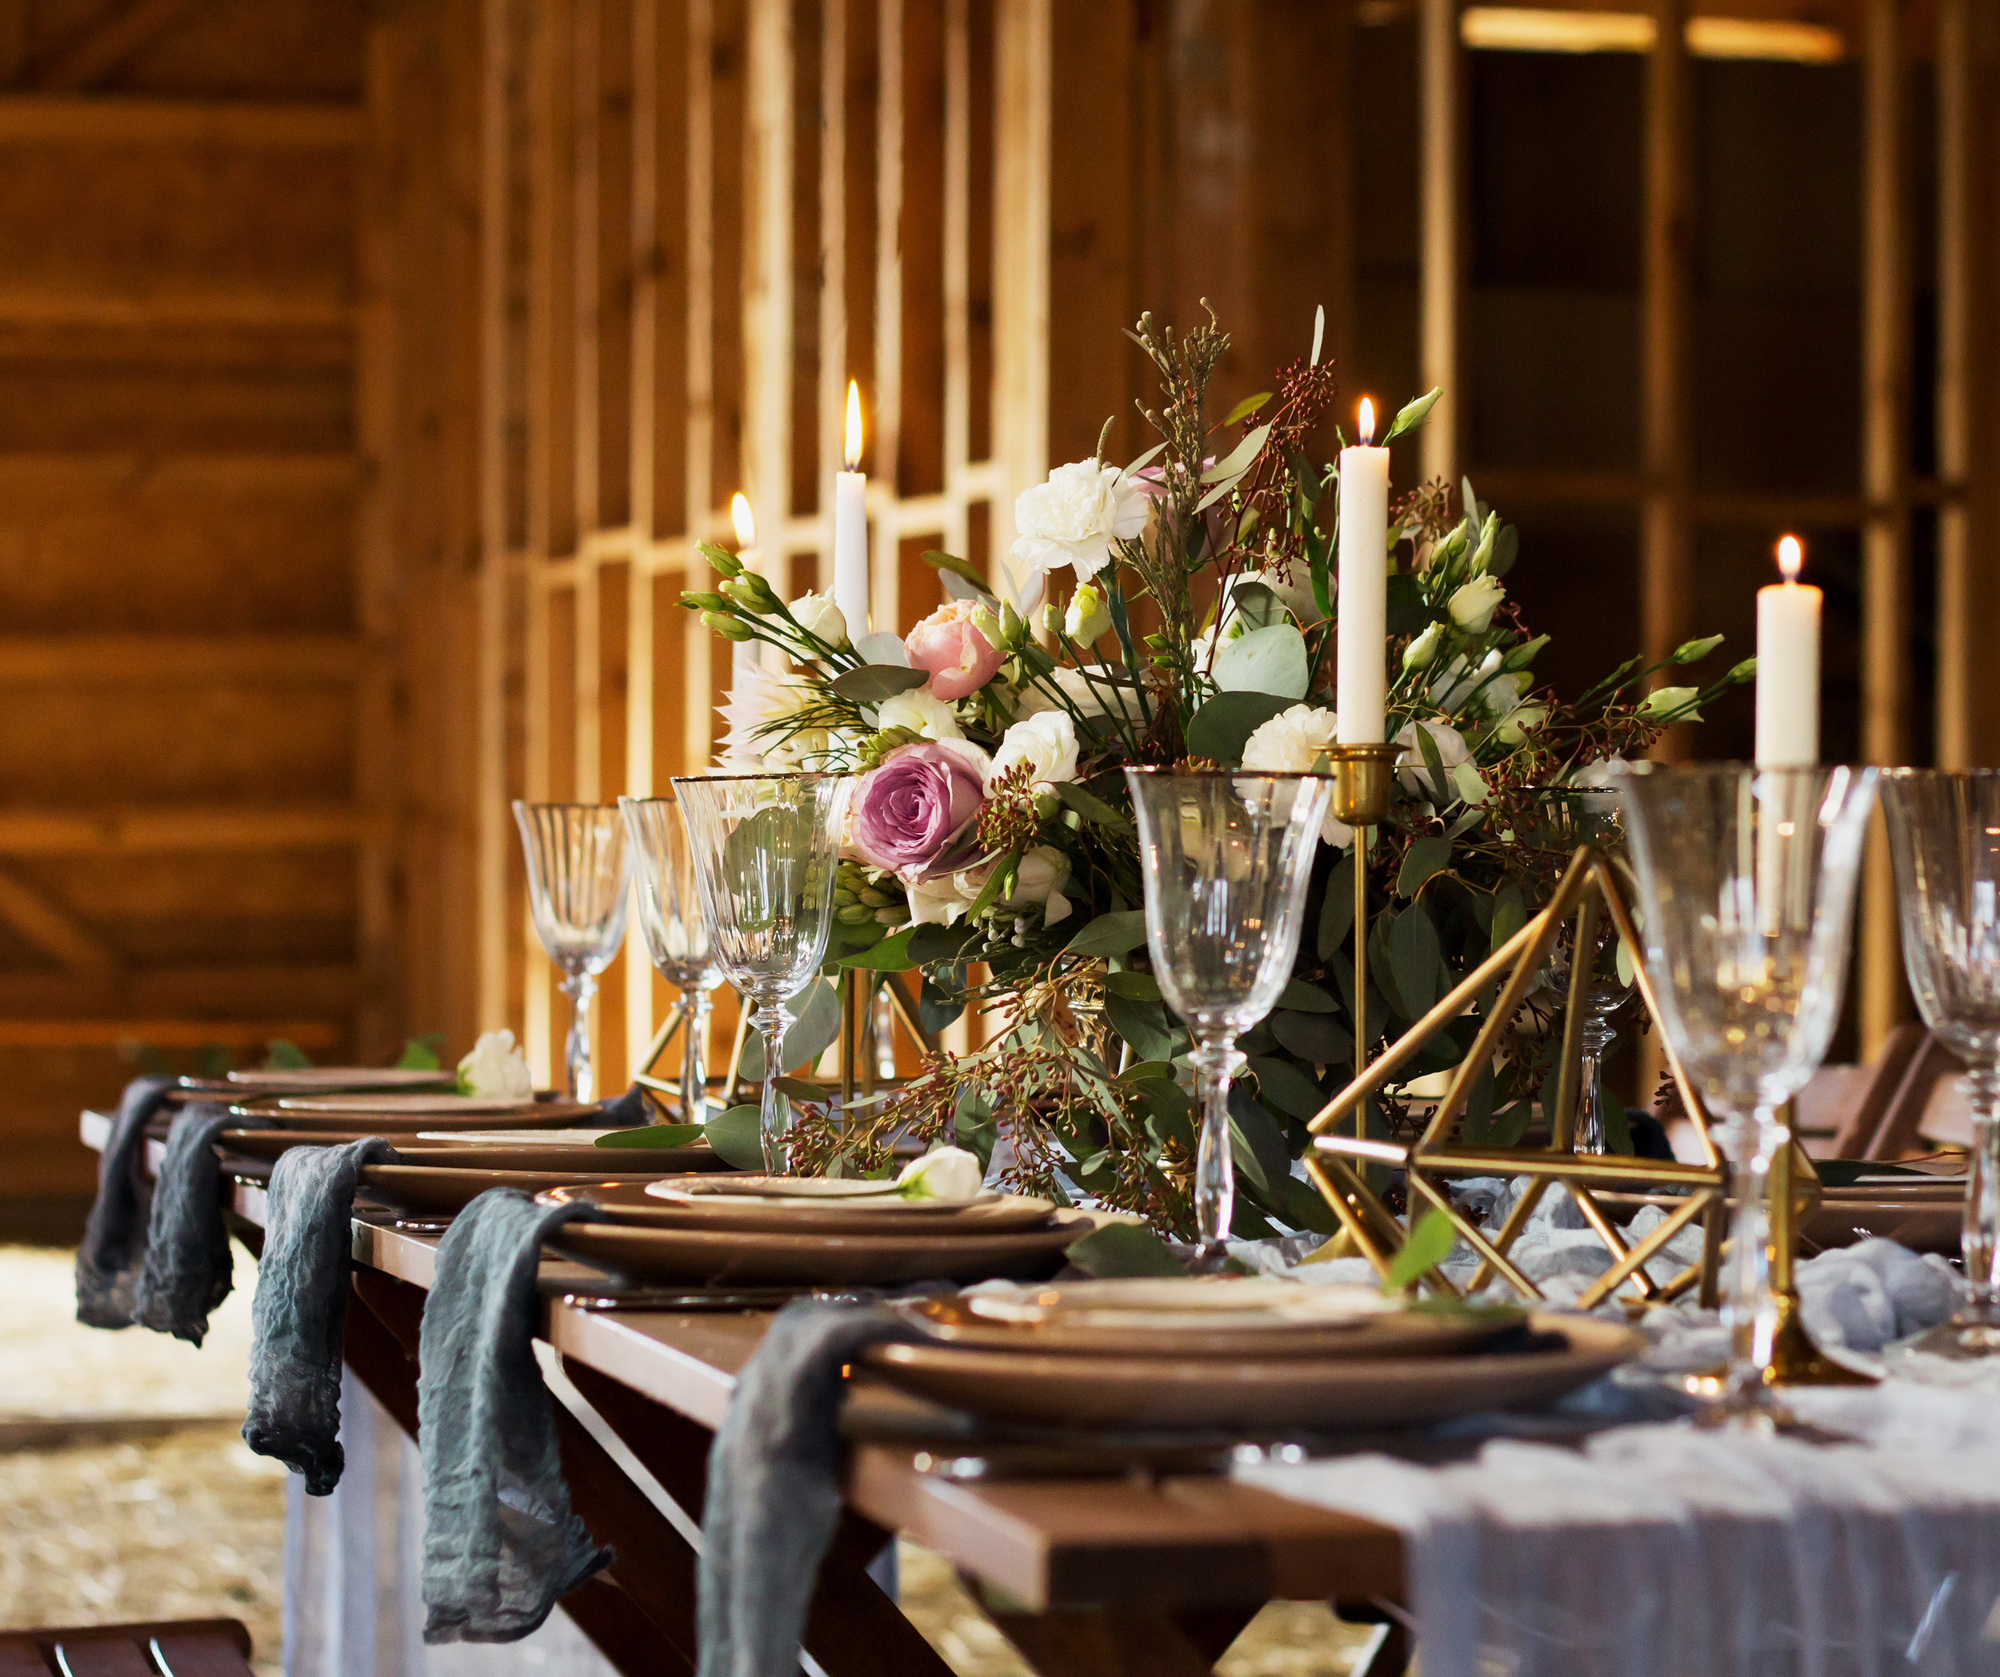 6 Rustic Wedding Ideas to Make Your Big Day Magical! | Tasteful Space